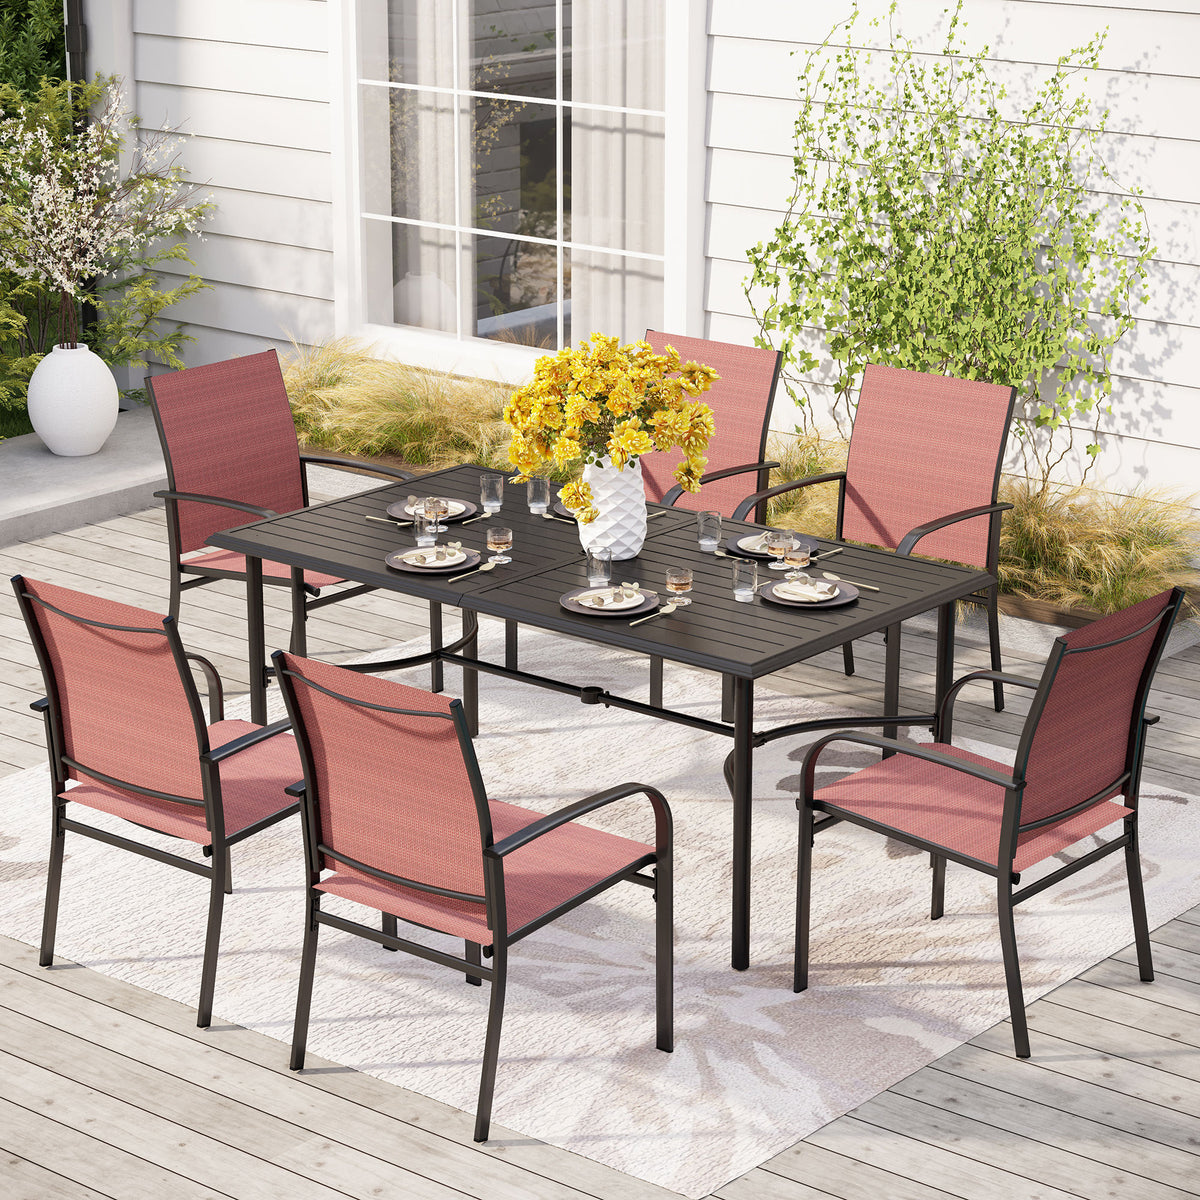 MFSTUDIO 7-Piece Patio Dining Set Embossed Table & Textilene Fixed Chairs